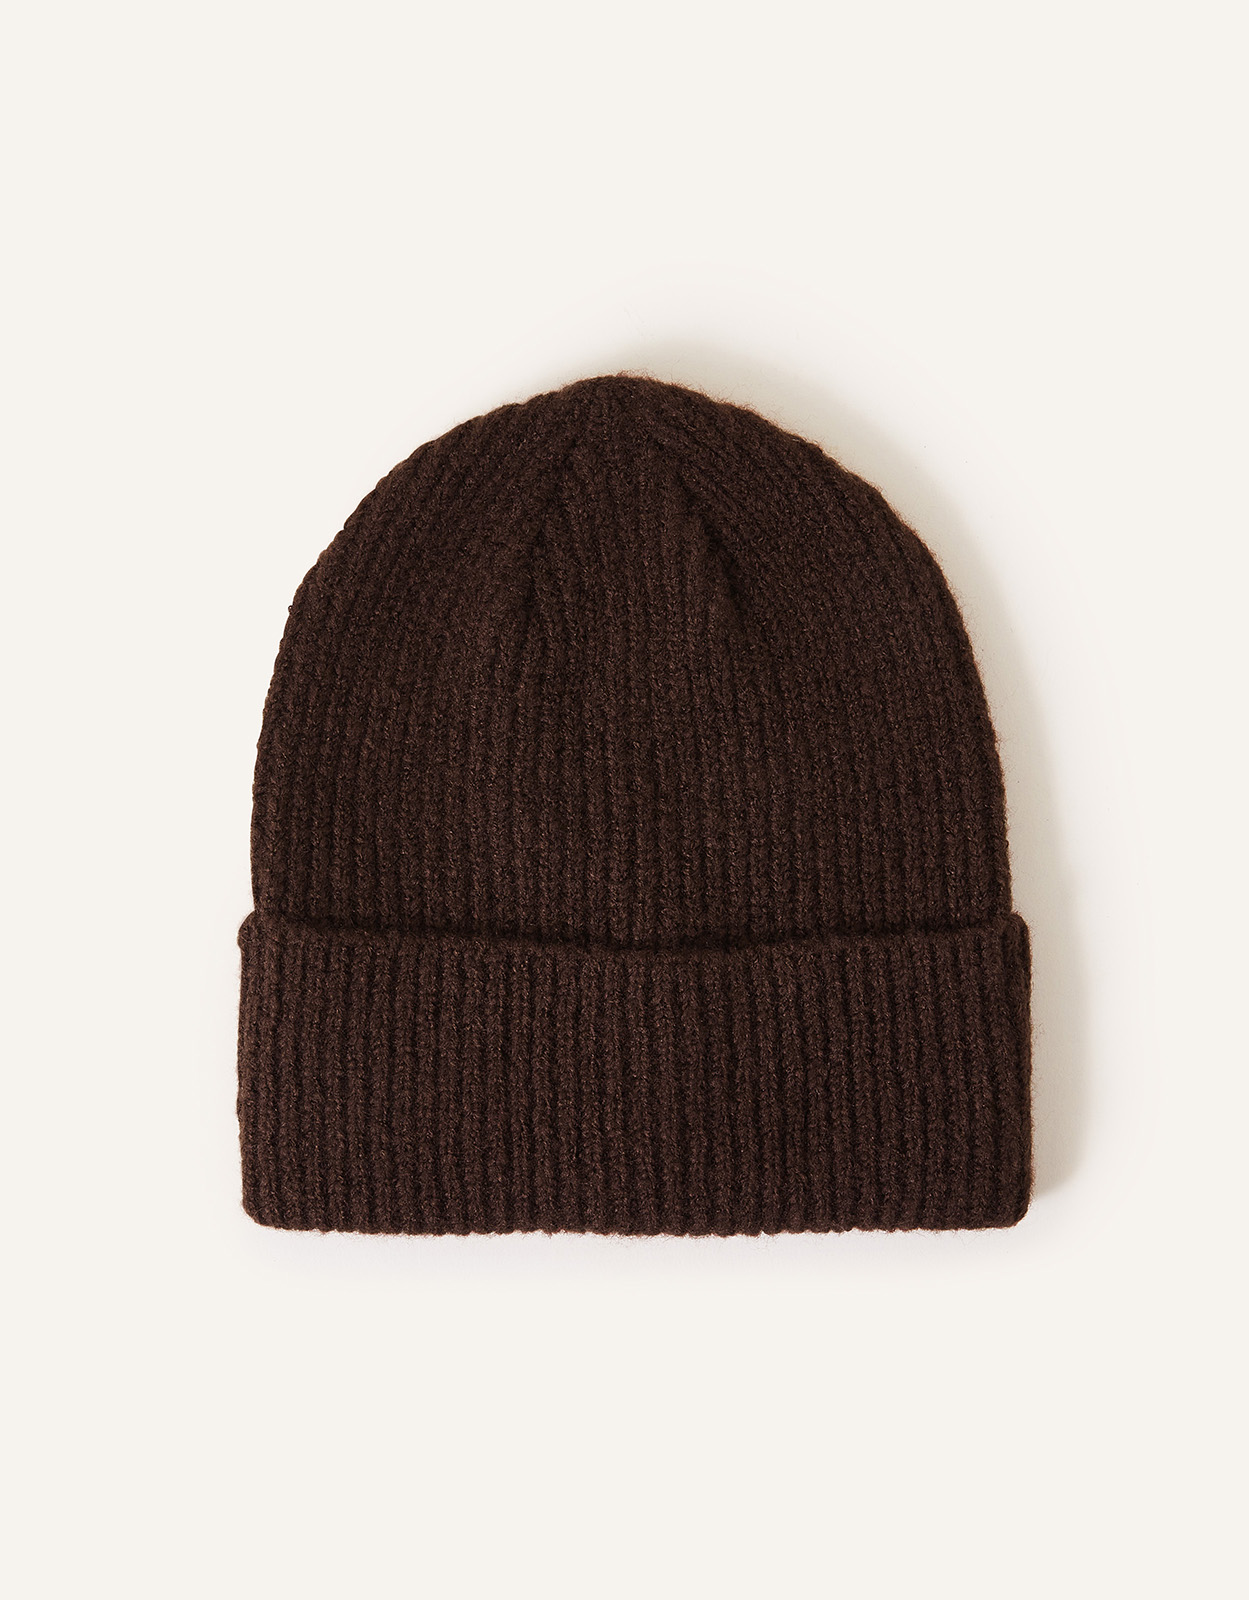 Accessorize Brown Classic Knitted Acrylic Soho Beanie Hat, Size: 22x8cm